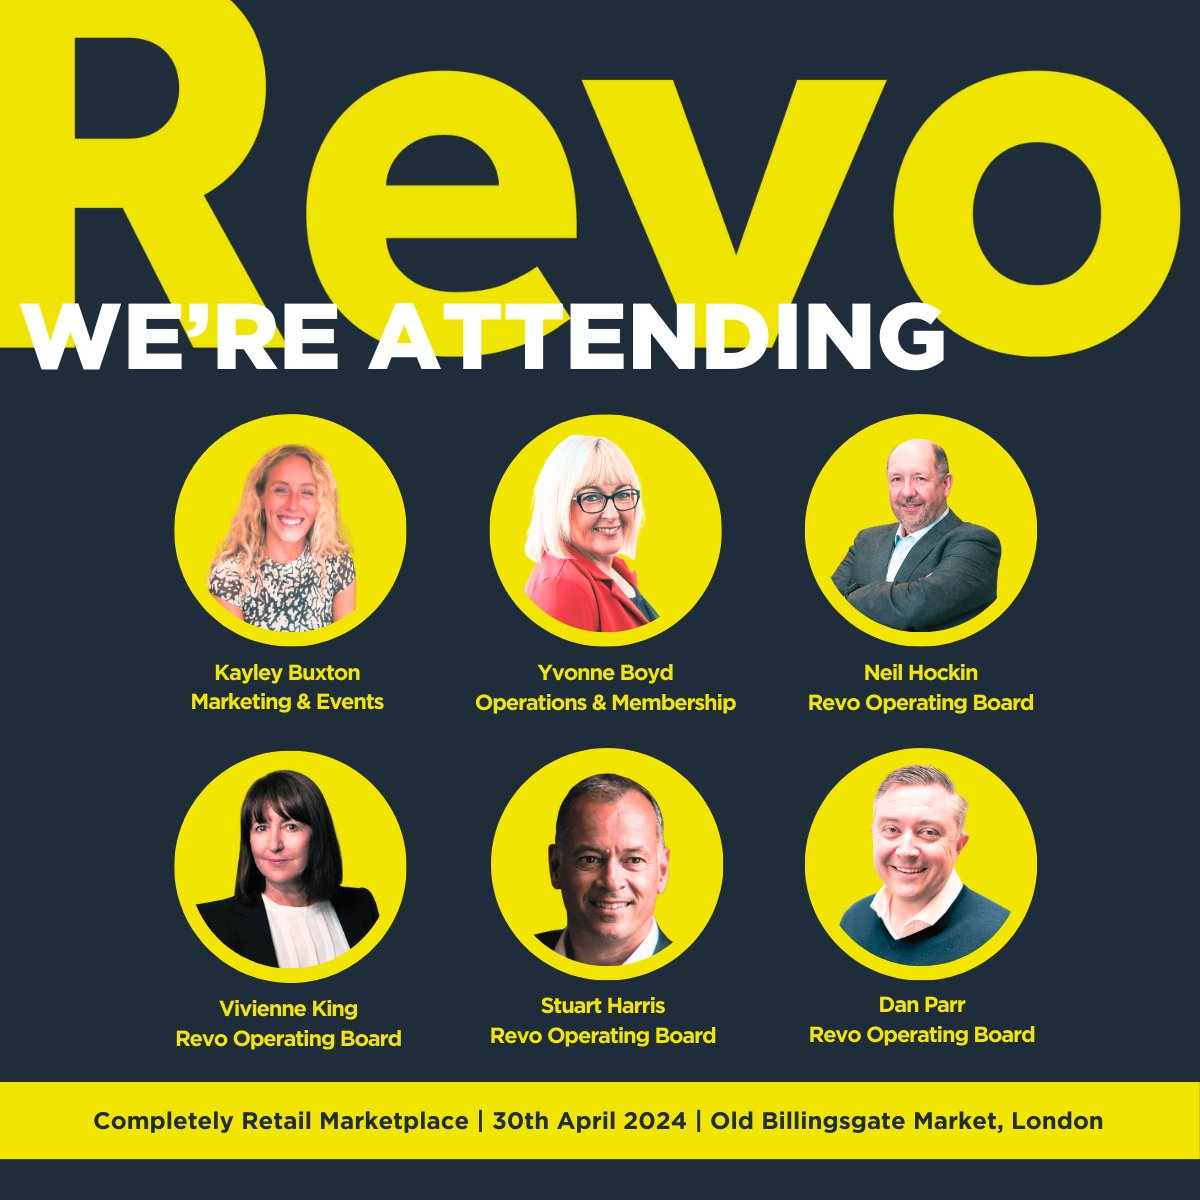 Connect with us through the conference platform and drop by the Revo stand on the day to engage in discussions about our community, becoming a member, our upcoming events such as The Revo's 2024 and the Revo Village & Conference and the broader sector. #CRMP24